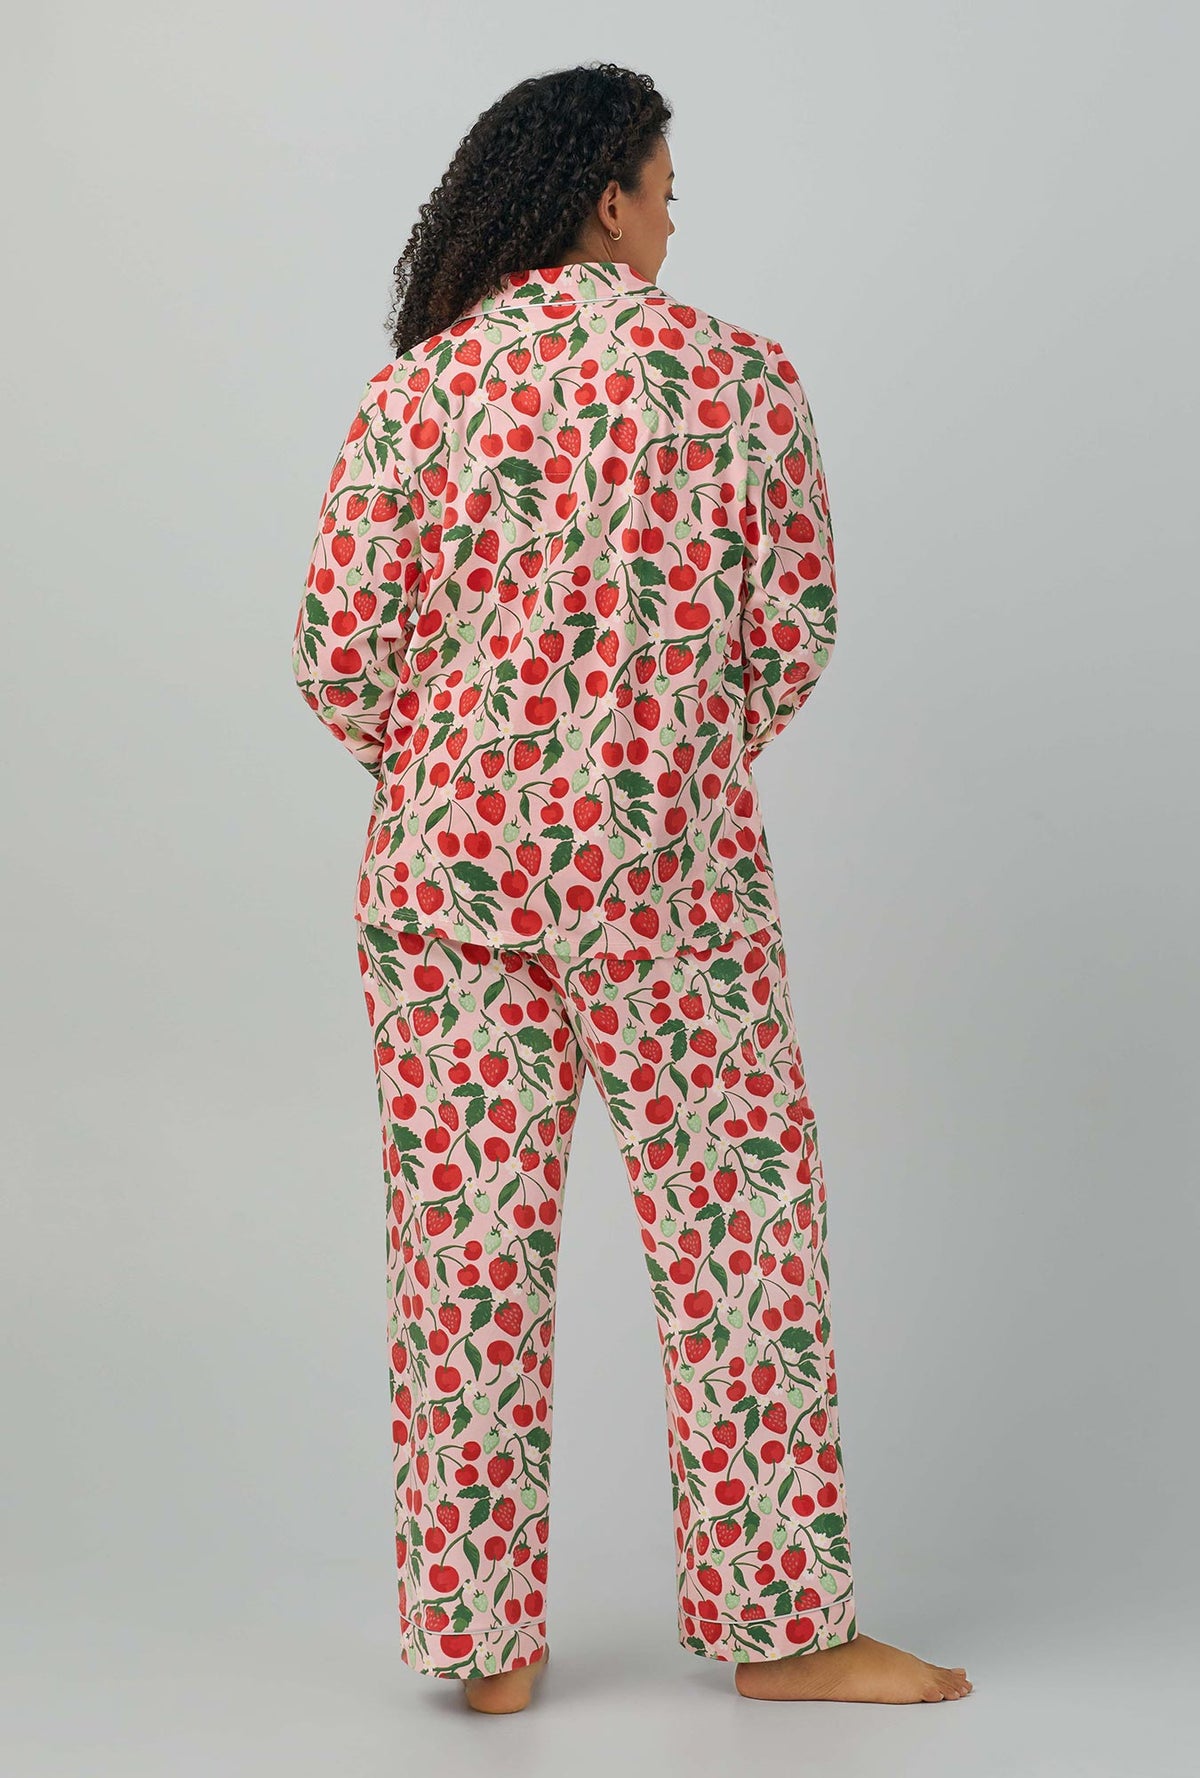 A lady wearing Long Sleeve Classic Stretch Jersey PJ Set with berry bliss print